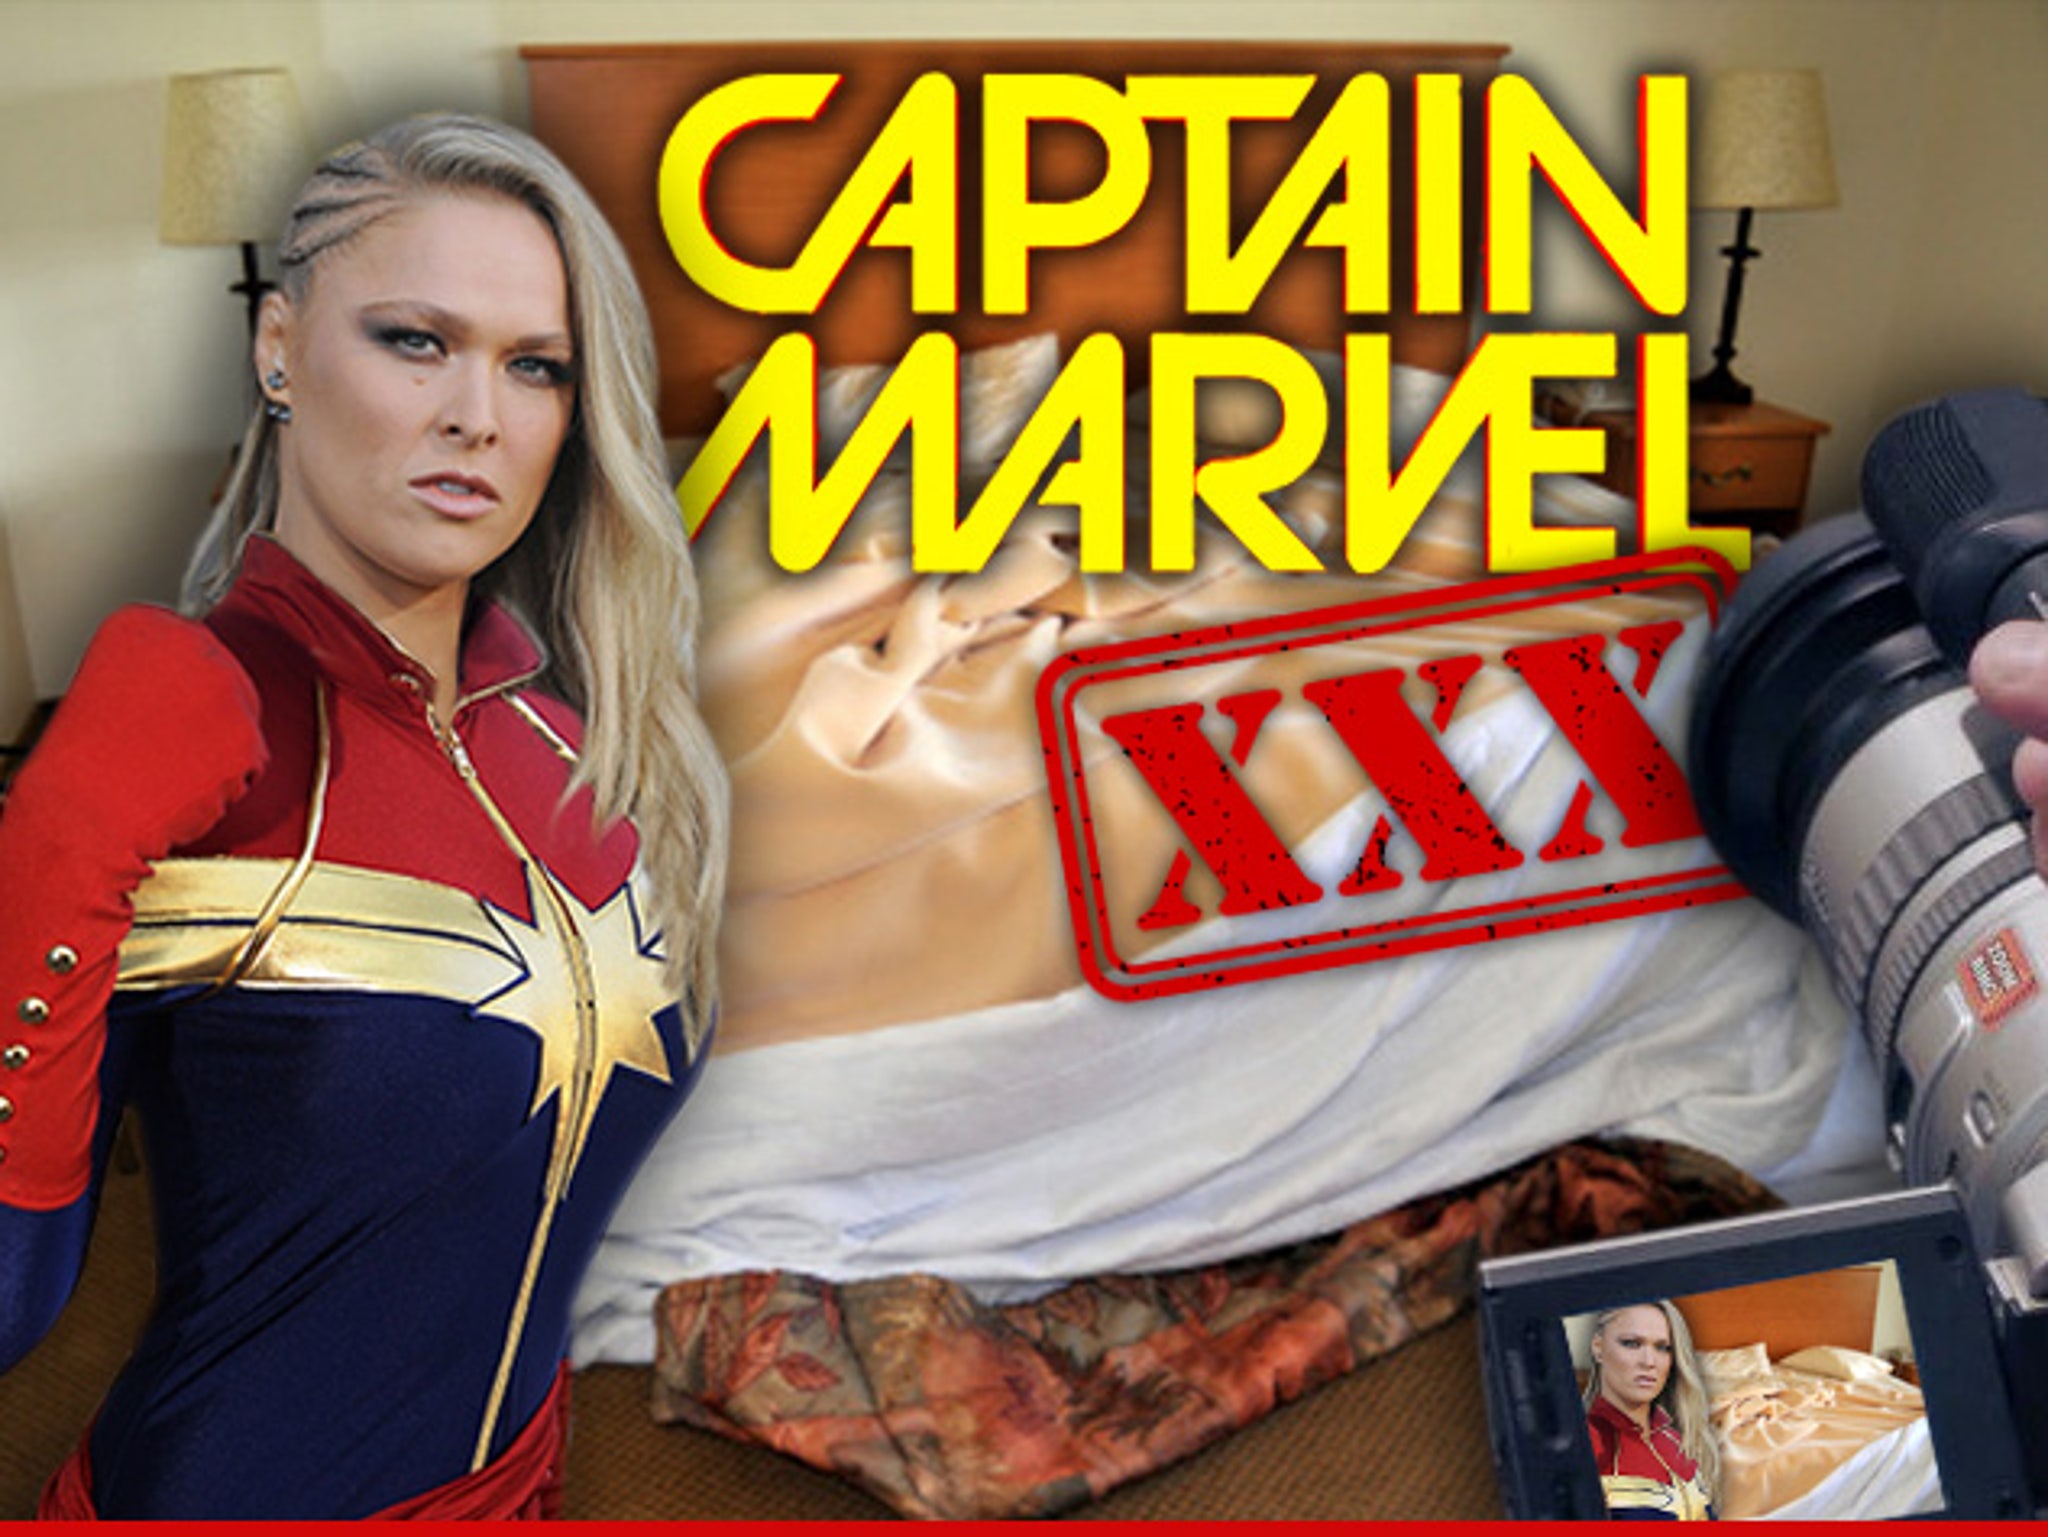 Wwe Sex Video Ronda Rausi - Ronda Rousey -- Gets First Shot to Be a Superhero ... But It's in ...